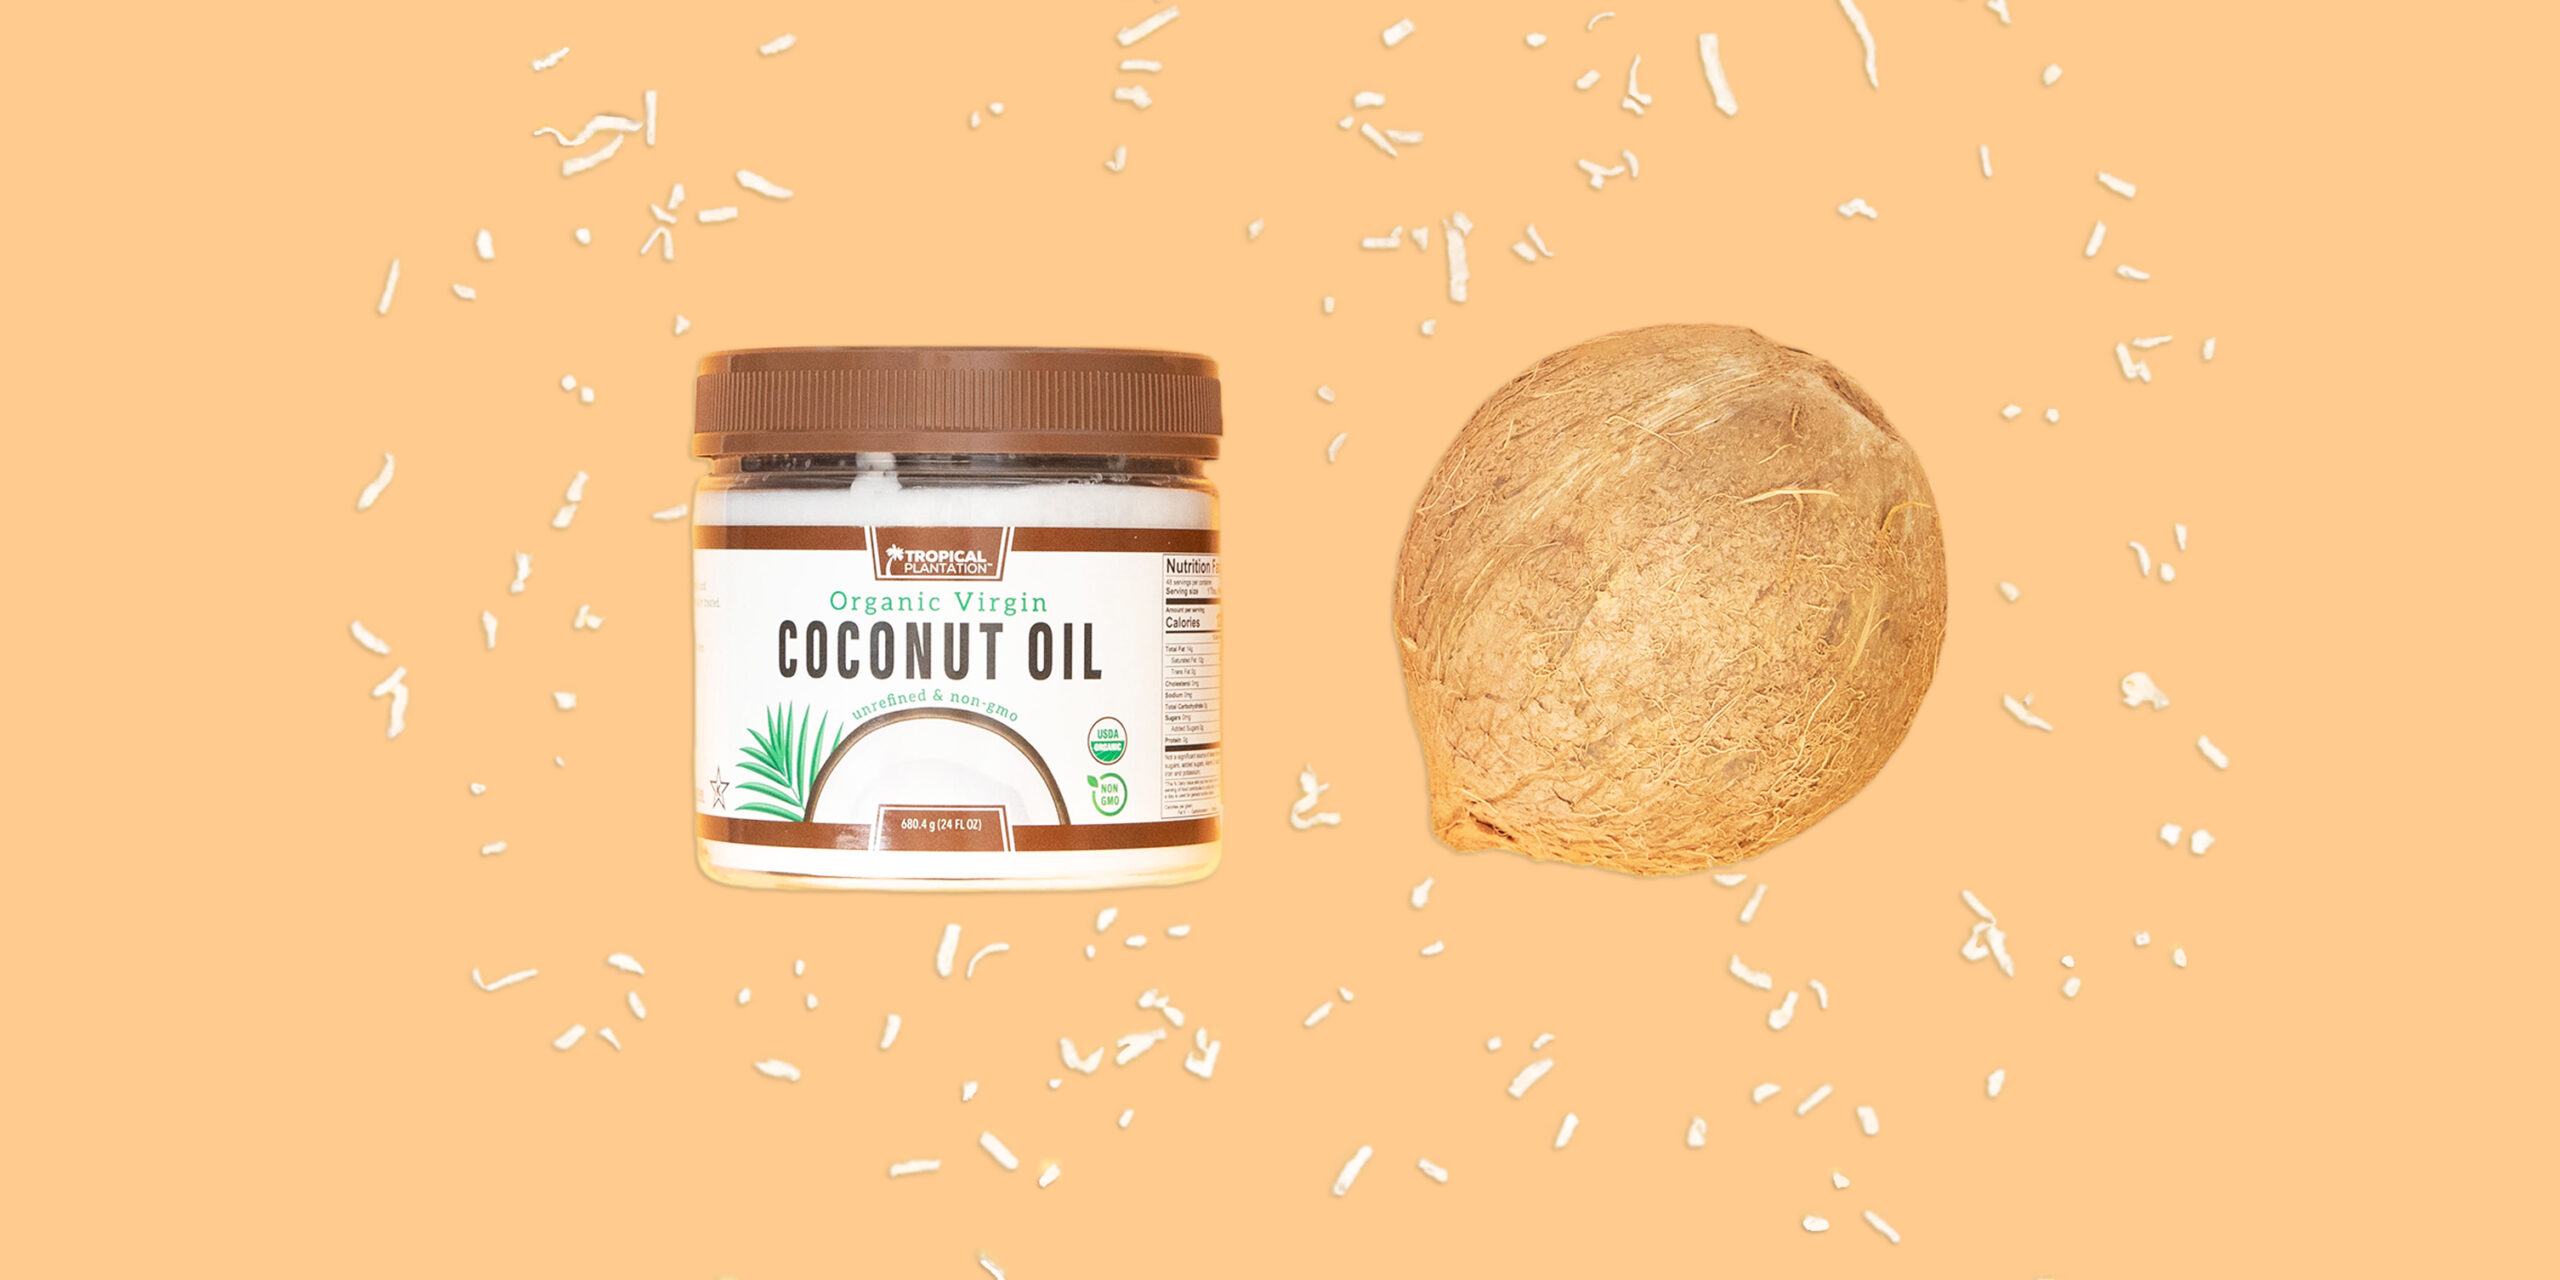 5 Reasons Coconut Oil Is A Household Staple - Lily of the Desert